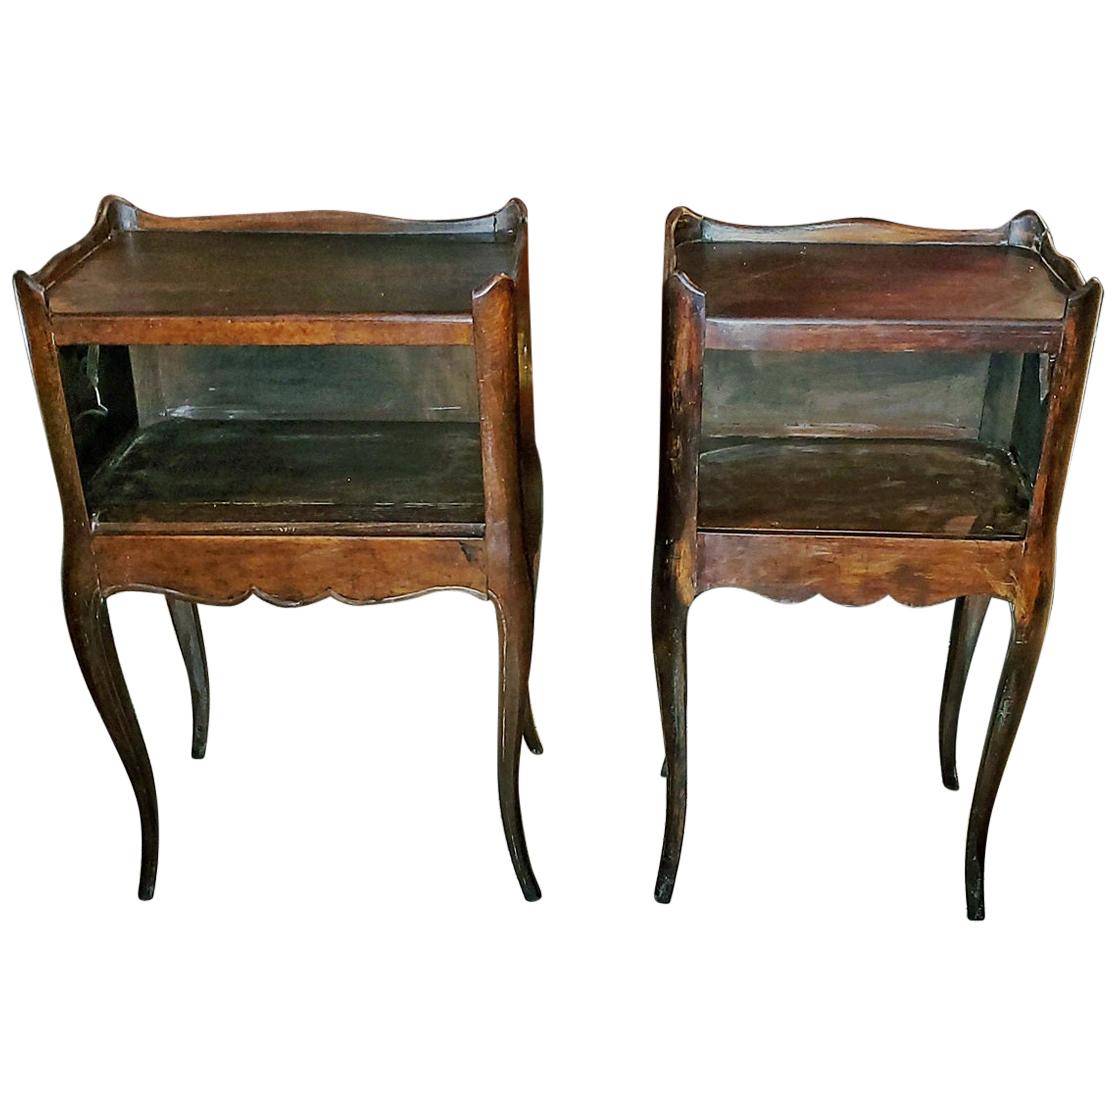 Pair of 19th Century French Country Walnut Side Tables